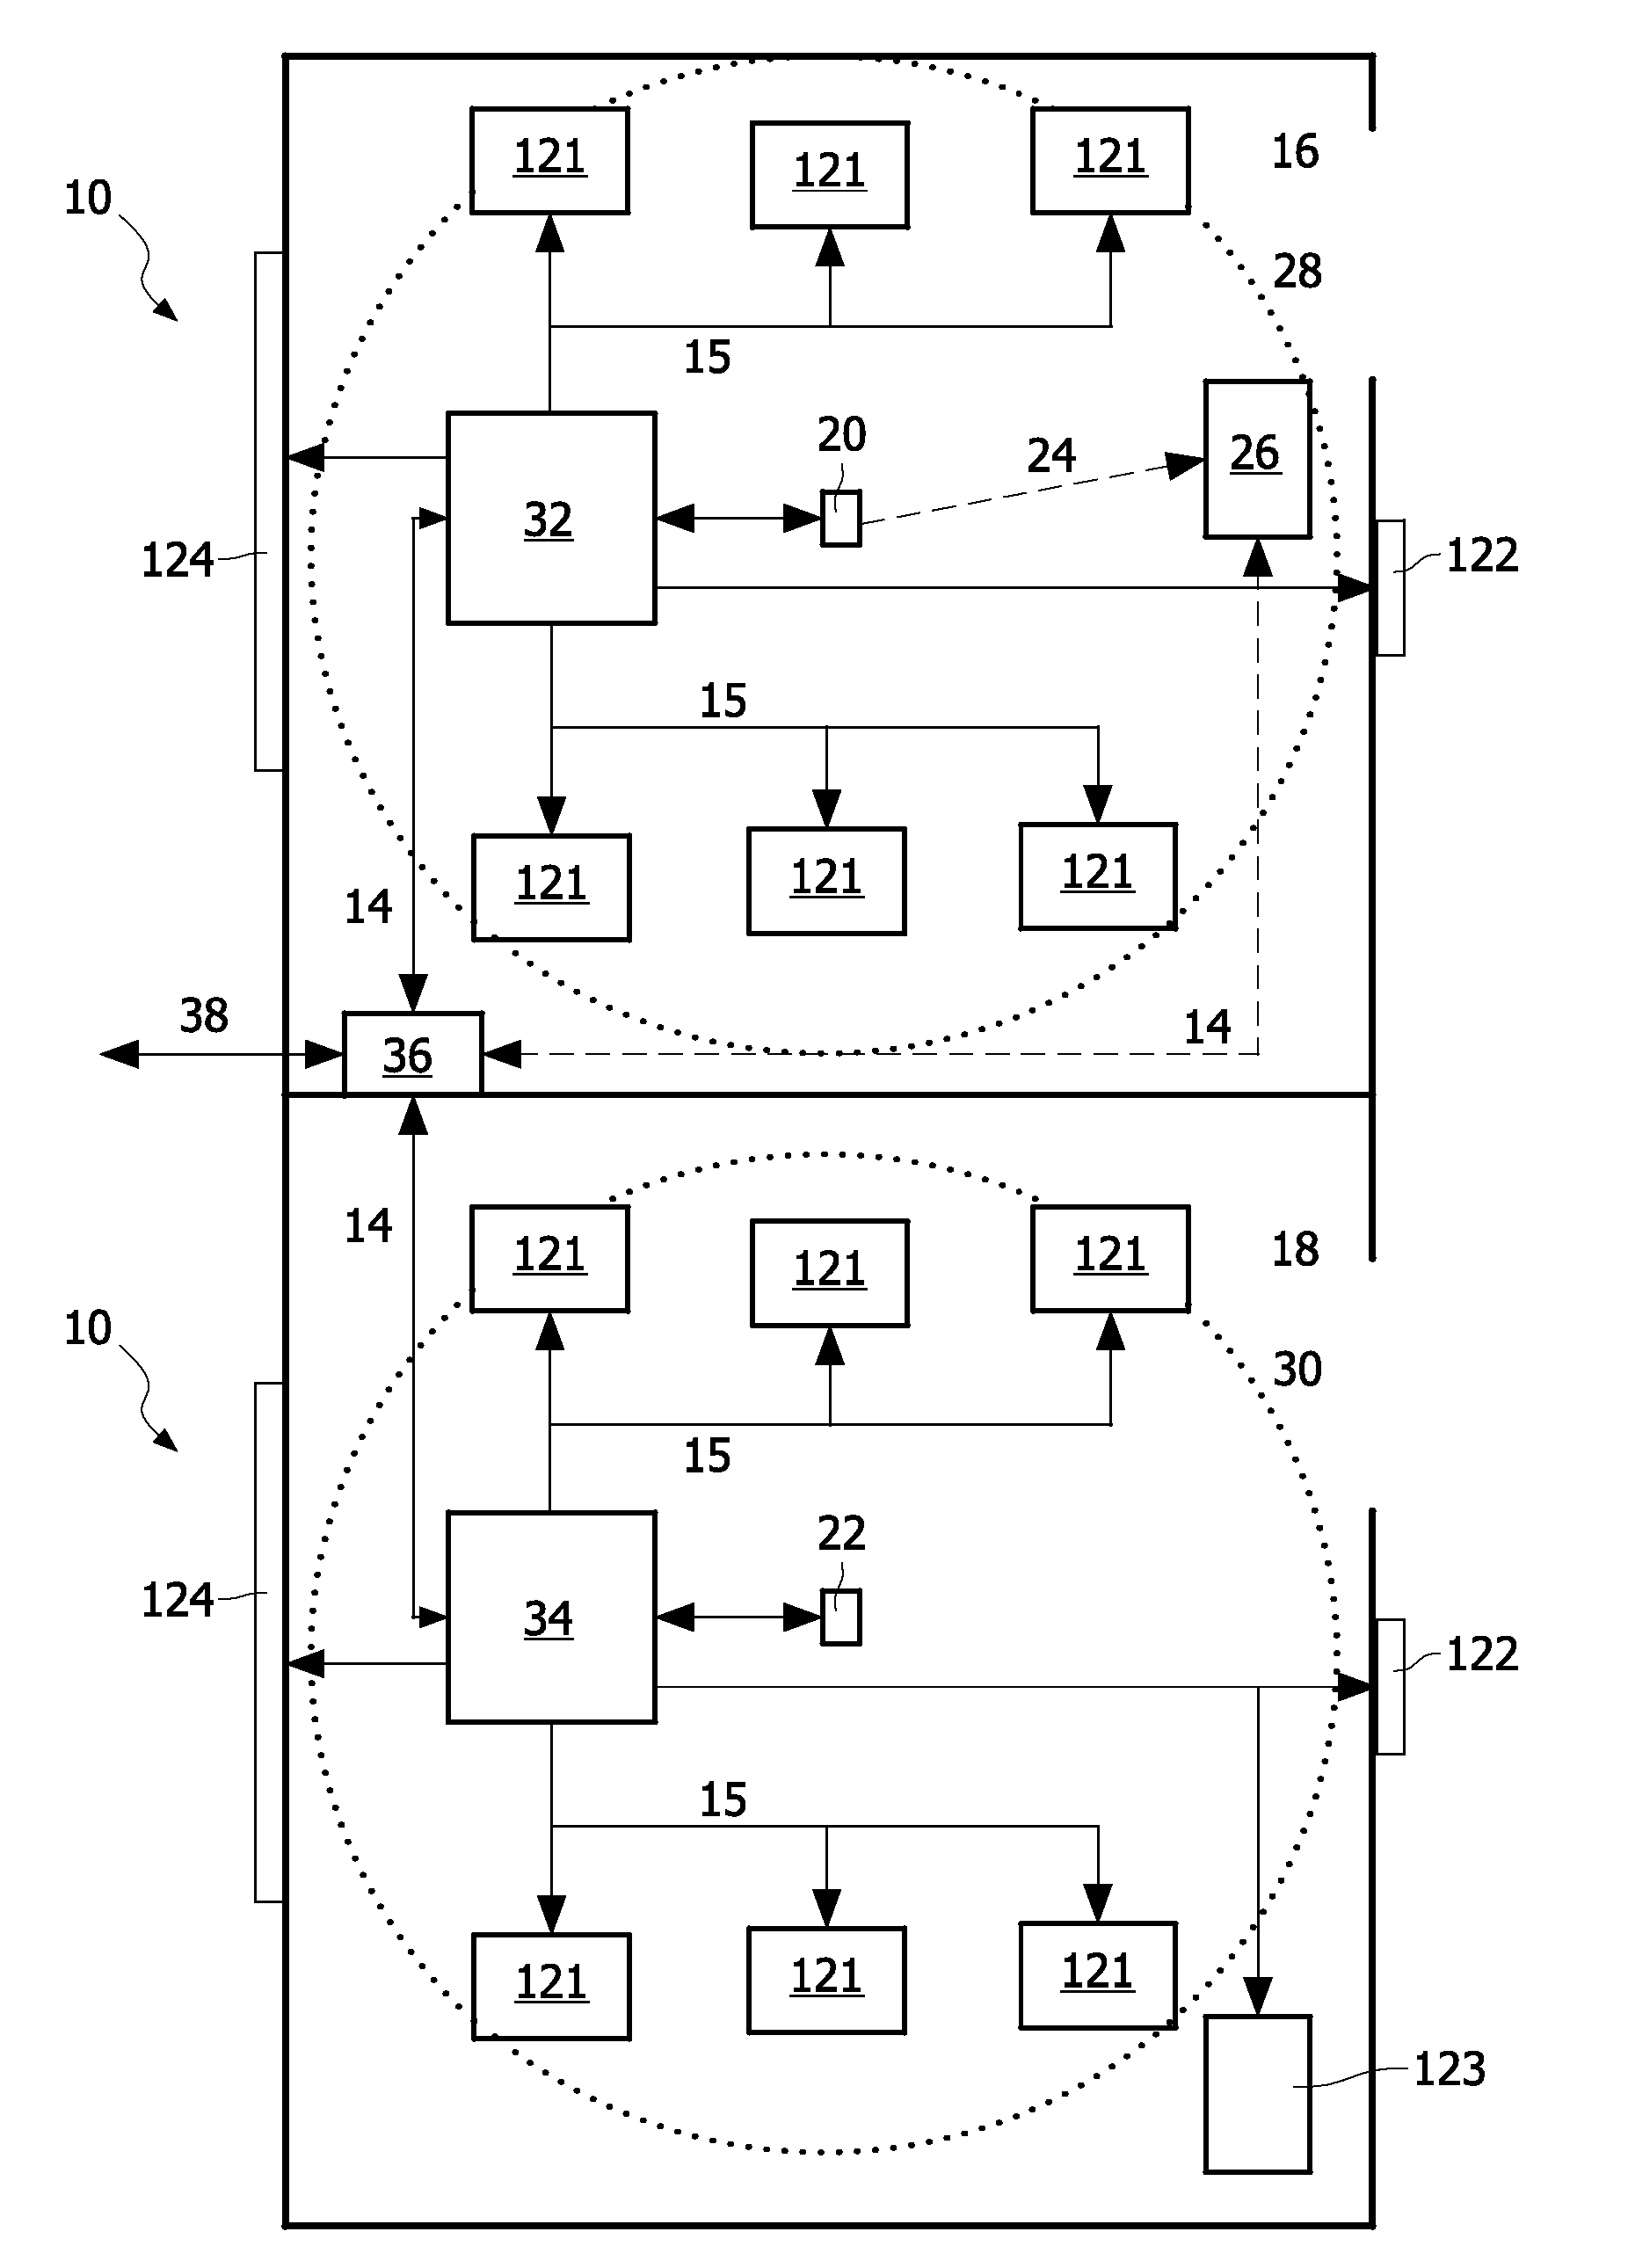 System and method for controlling the access to a networked control system